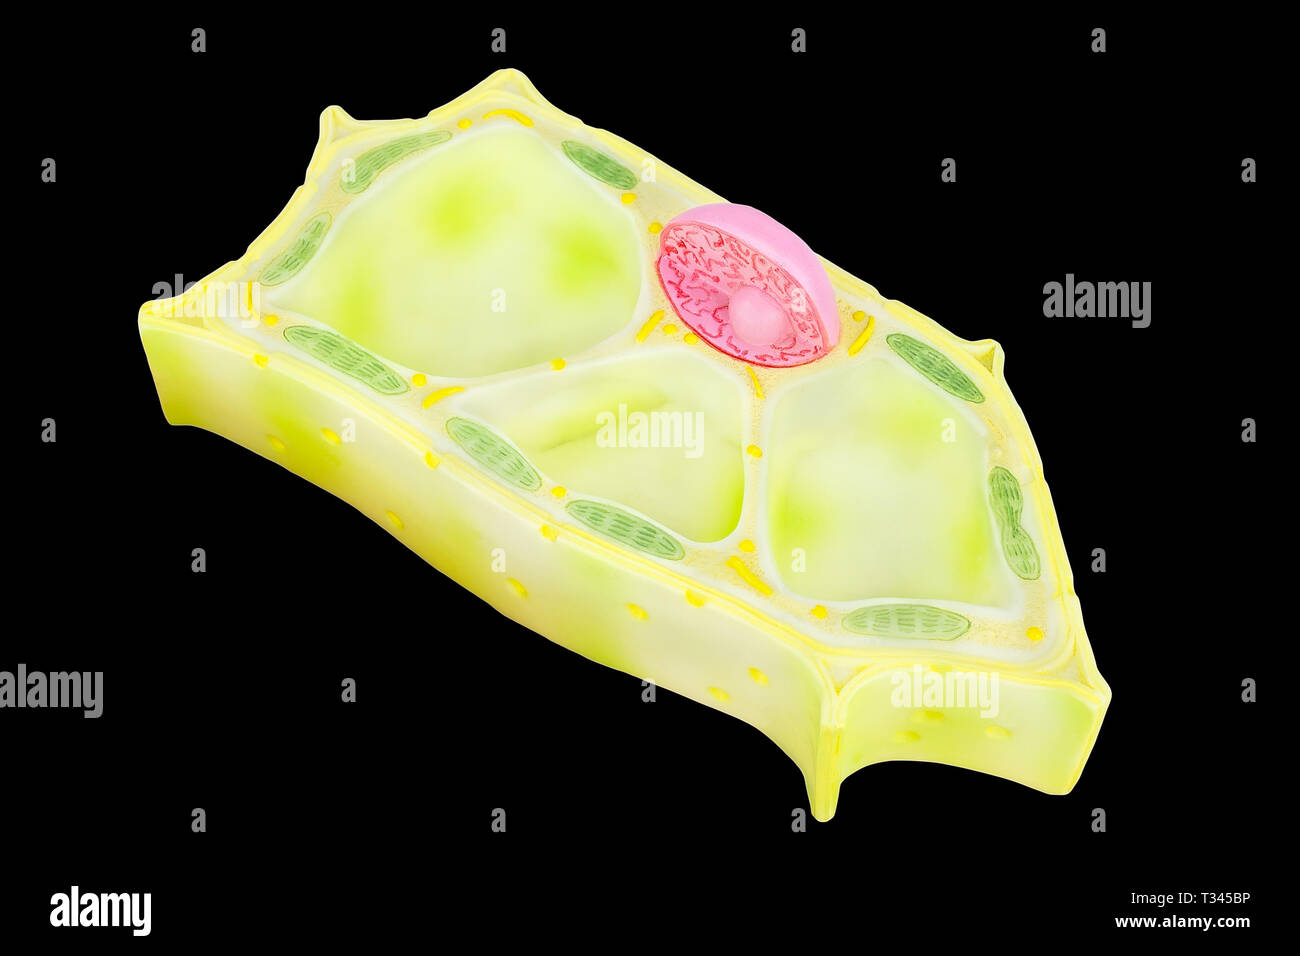 Plant cell model for education isolated on black background Stock Photo